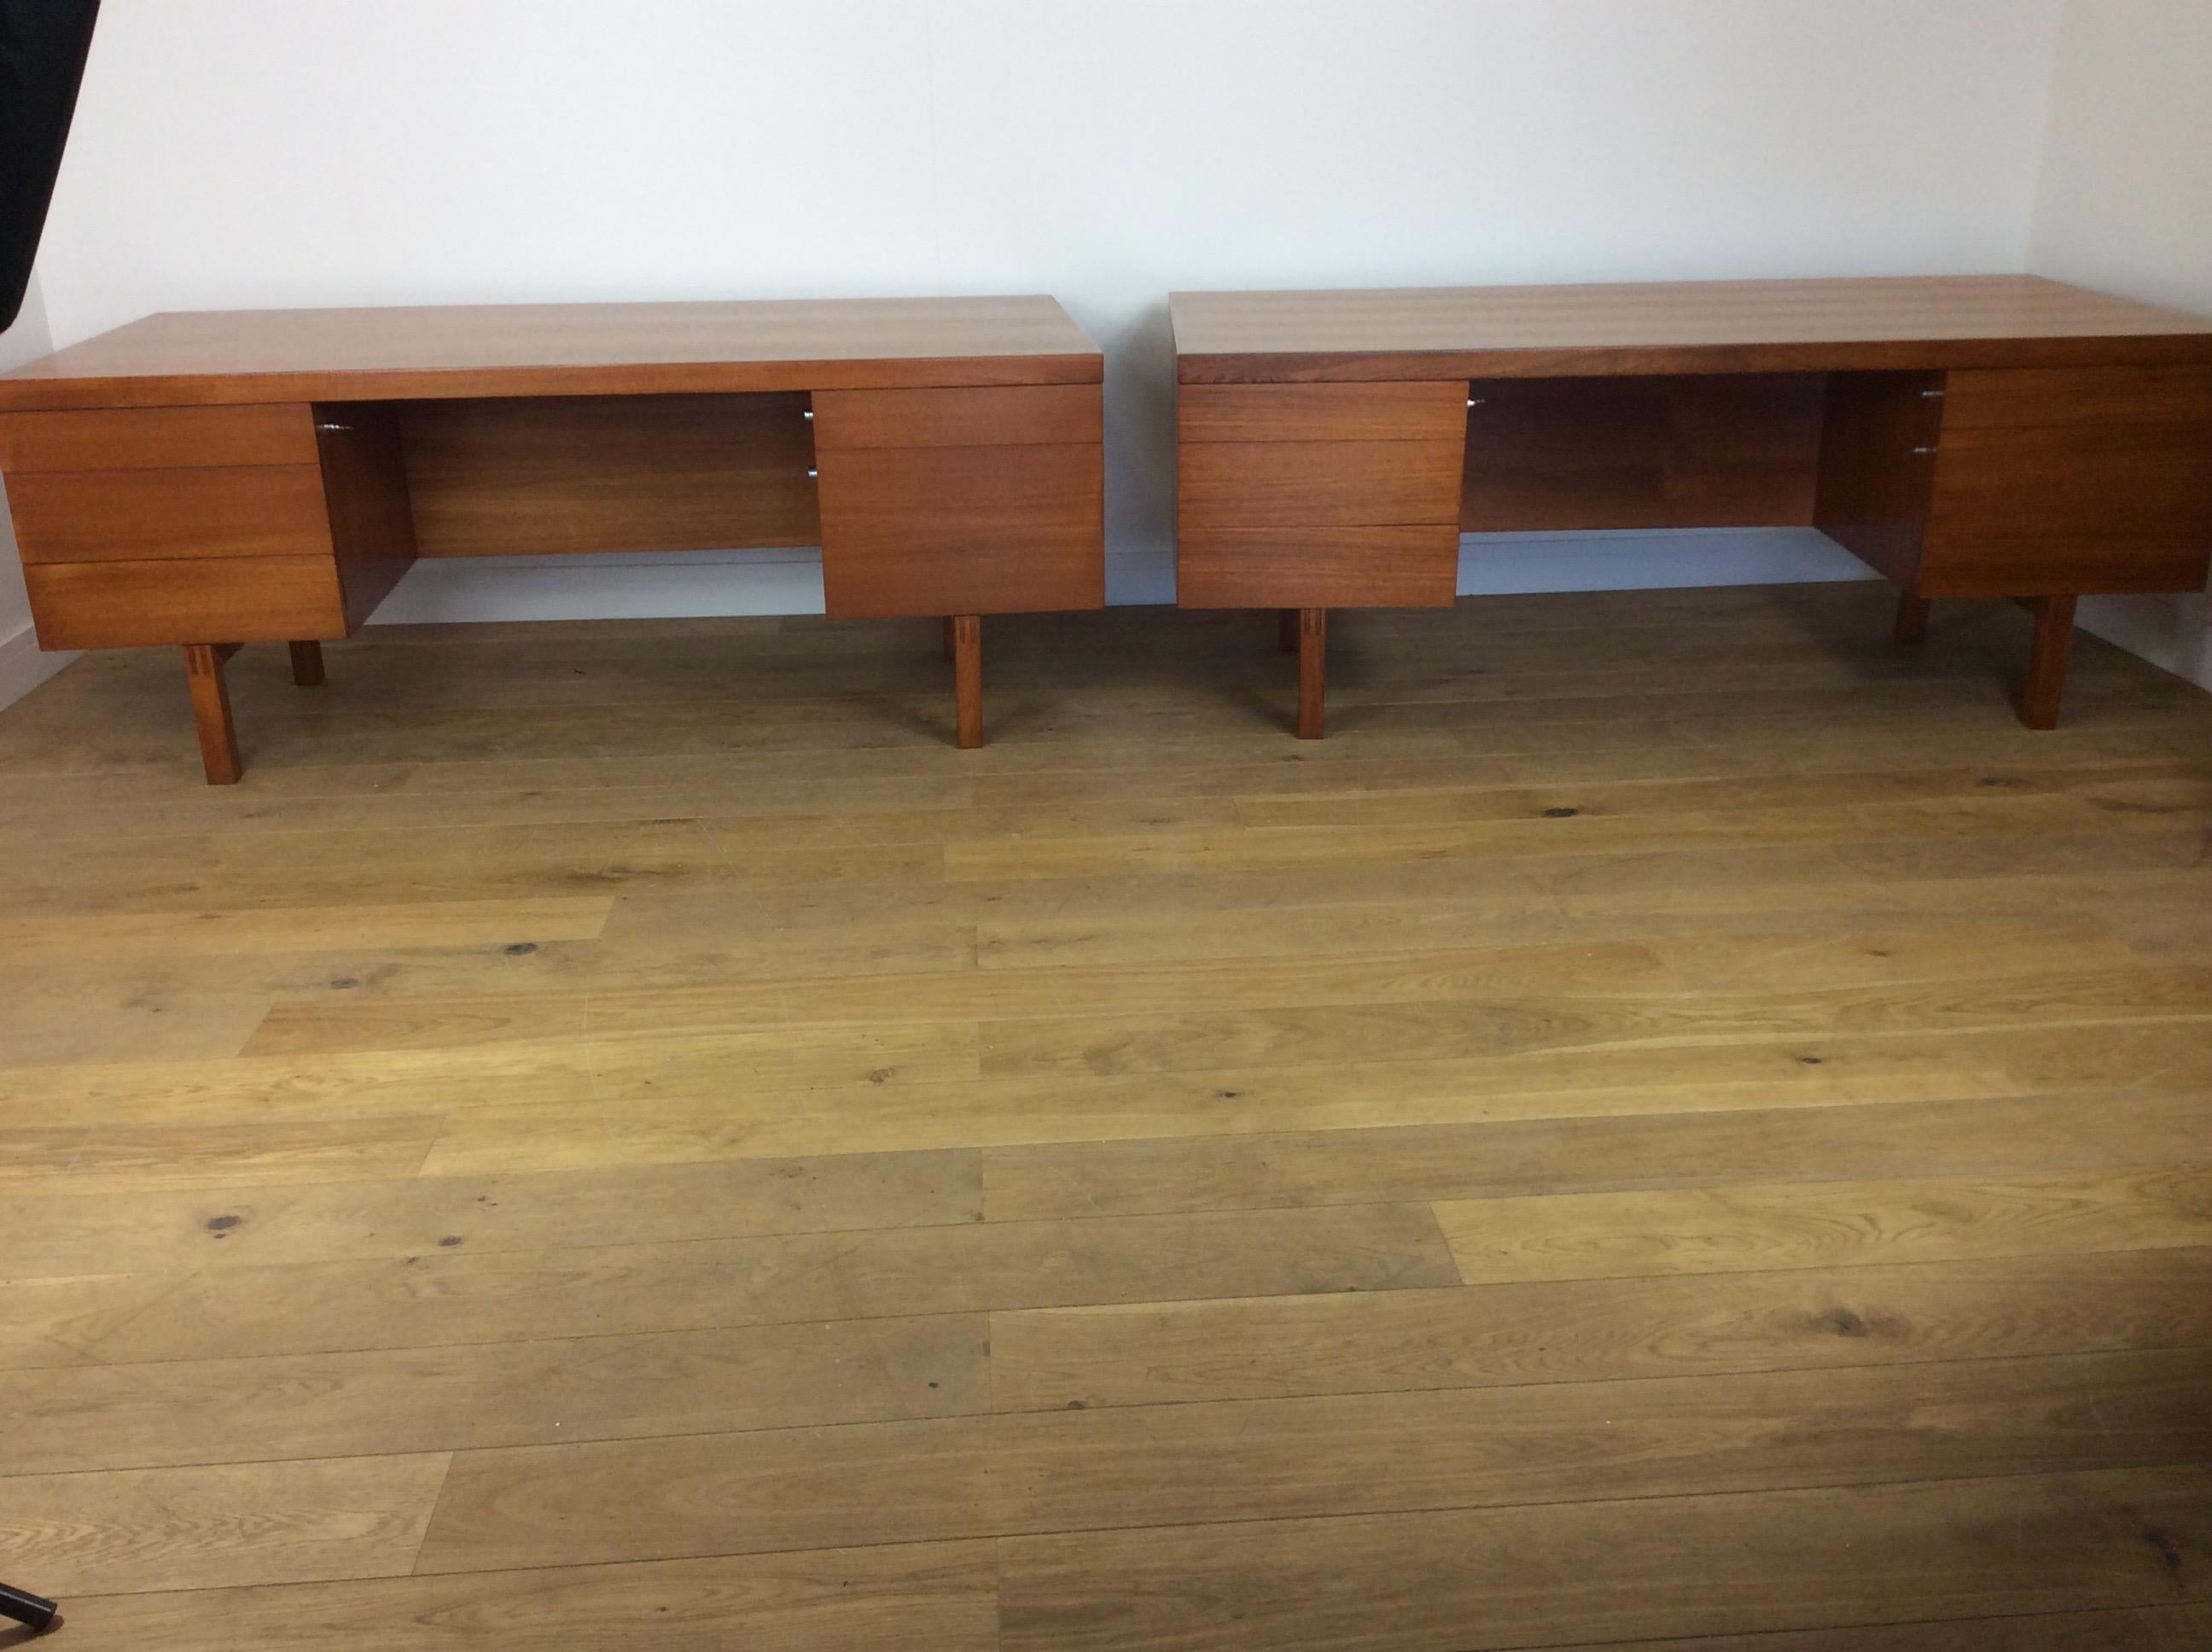 A pair of midcentury desks by Alfred Cox.
These rare examples have come from the storage rooms of the British Museum.
Beautiful streamline desks in a Fine teak wood.
No handles or drawer pulls giving these a sleek clean appearance.
A pair of